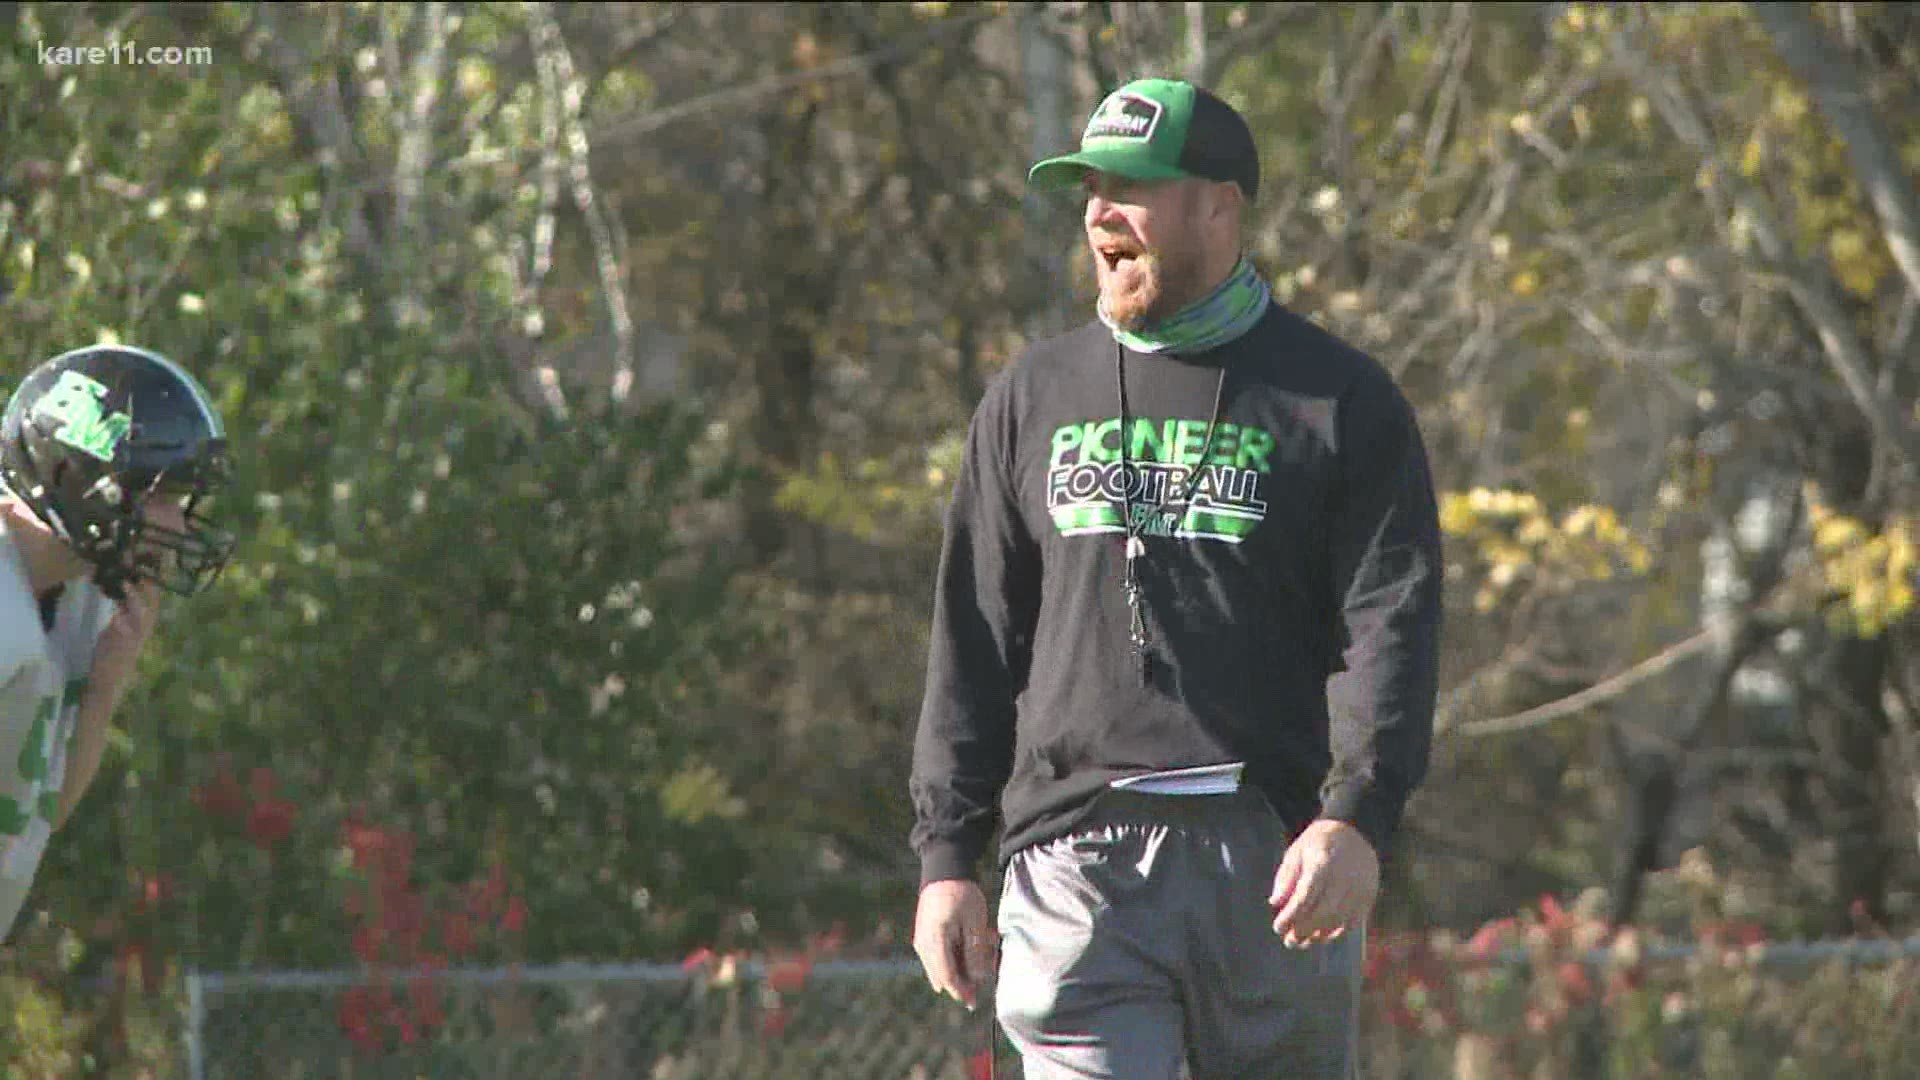 Hill-Murray is focusing on being ready with new head coach Rob Reeves. The Pioneers face North St. Paul on Saturday.